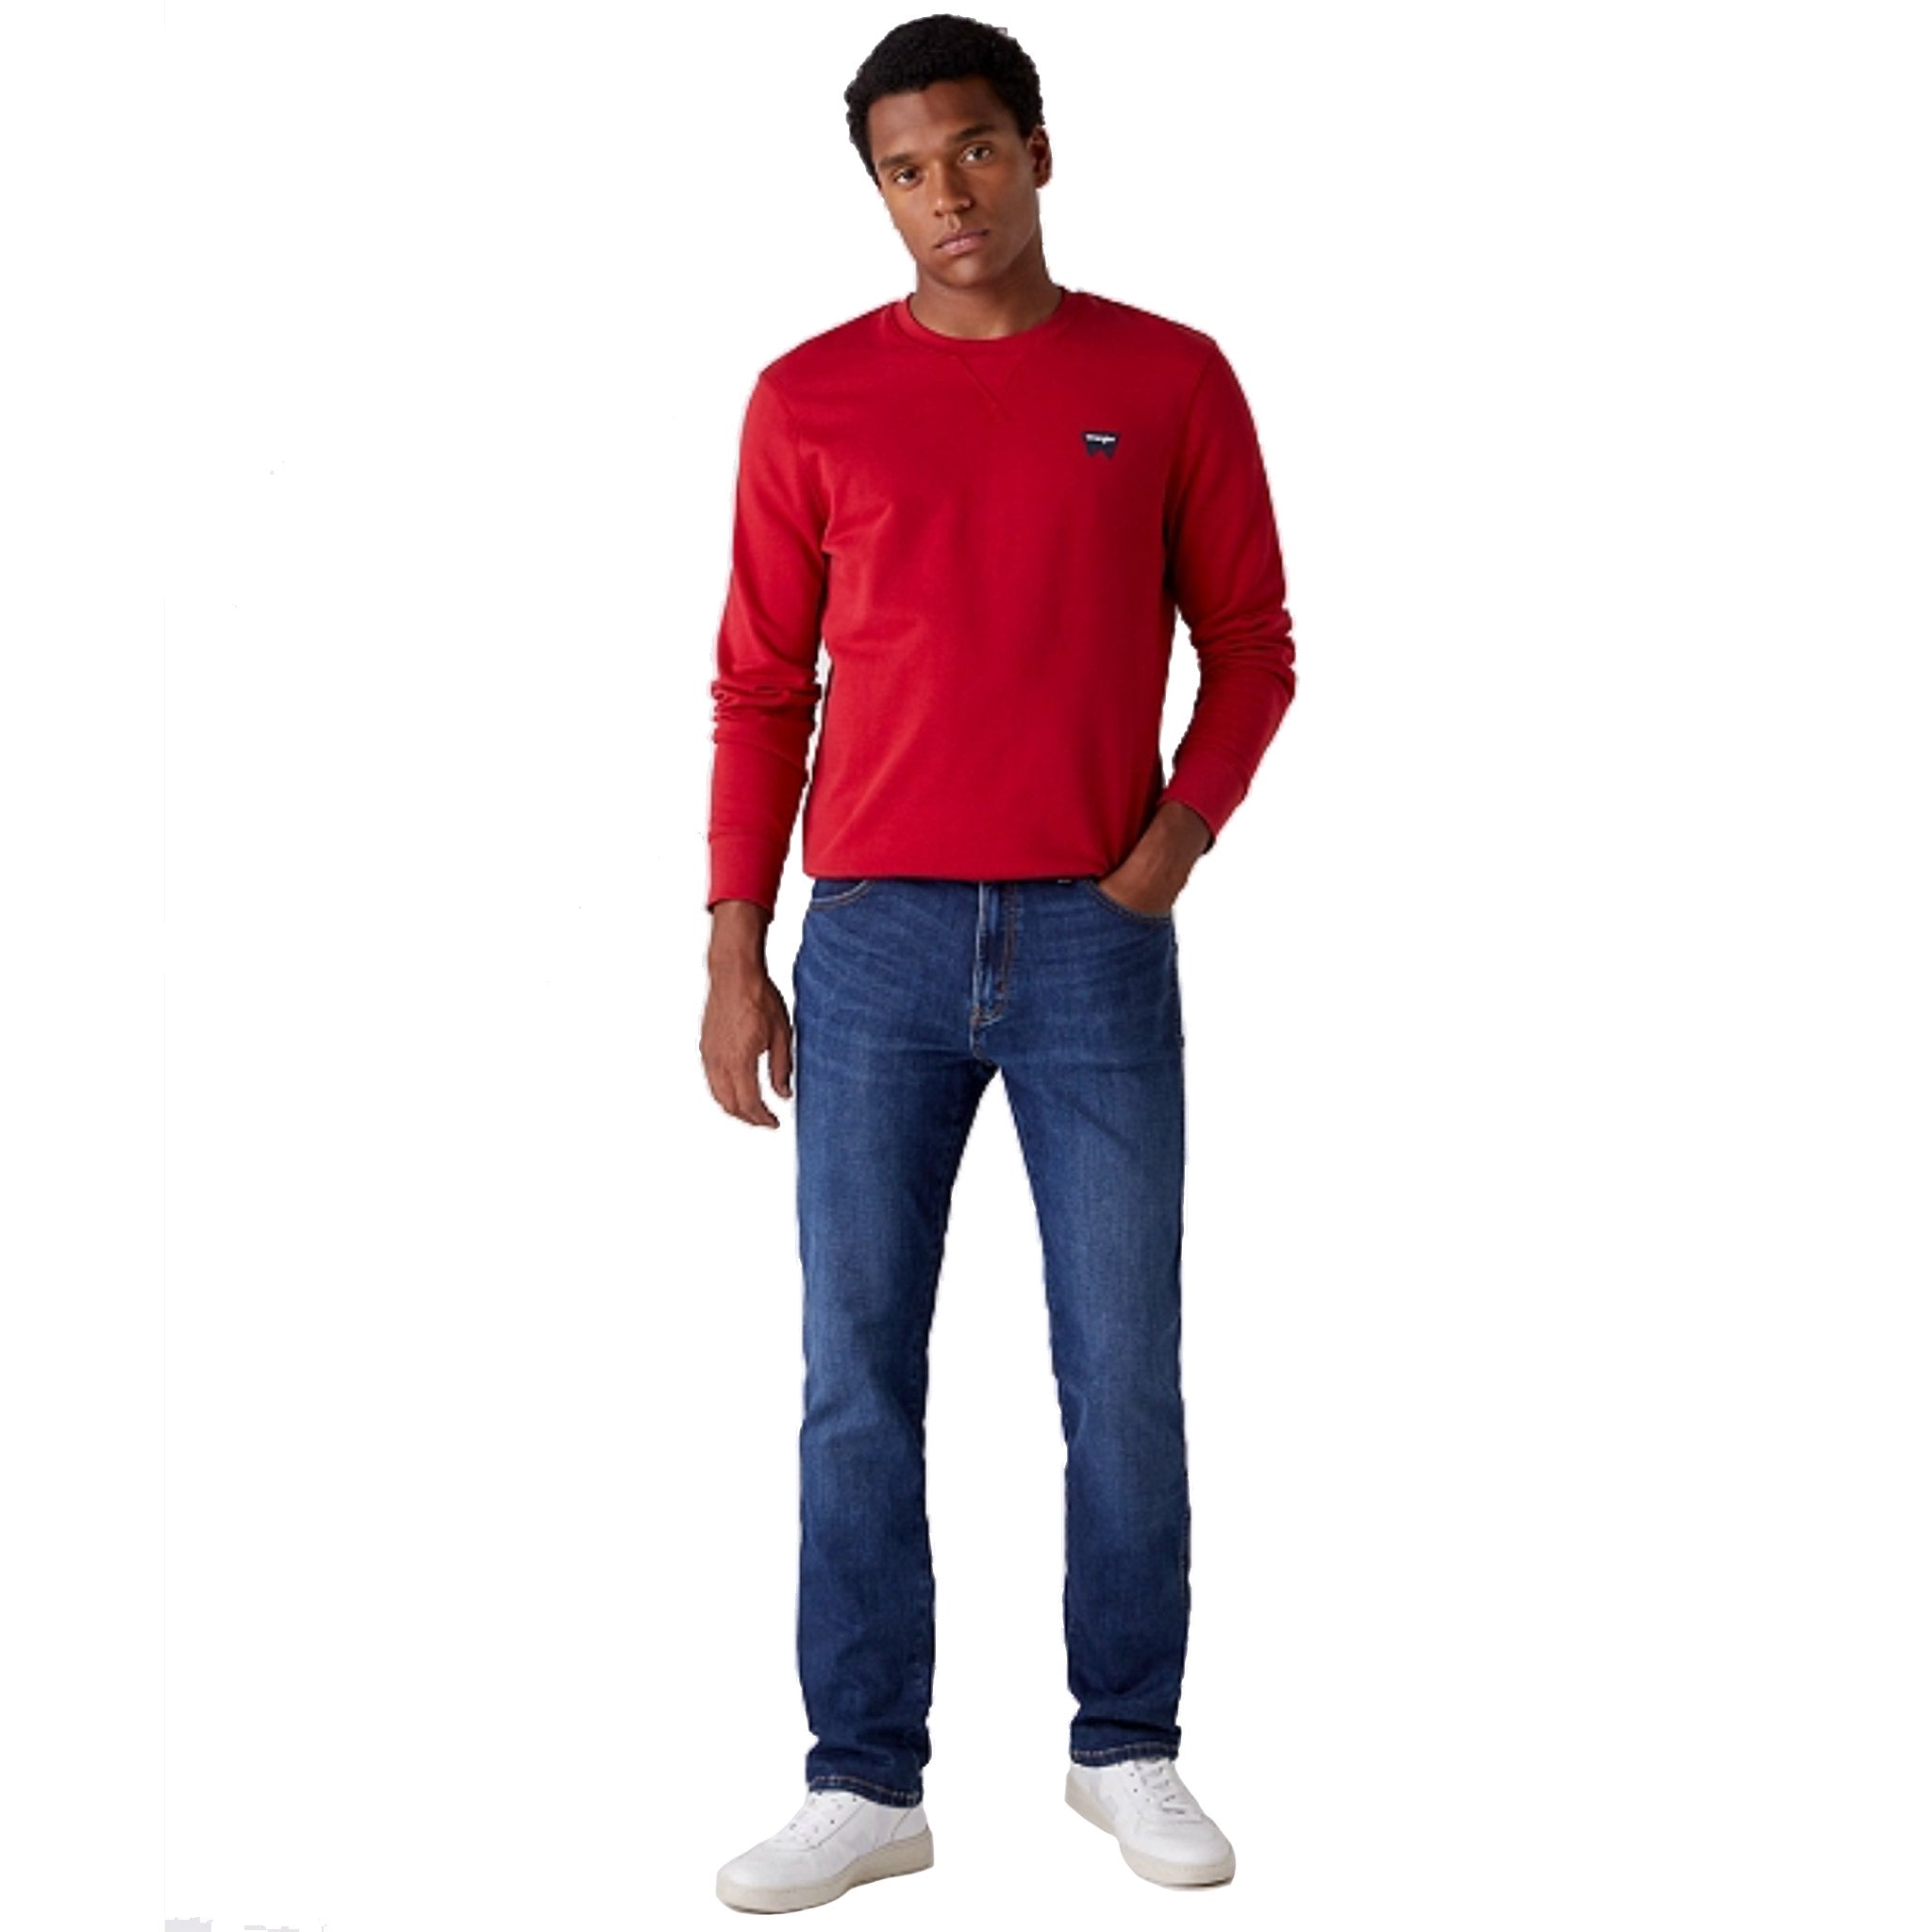 Wrangler Sign Off Sweatshirt in Red Worn By Model With His Hand In Jeans Pocket